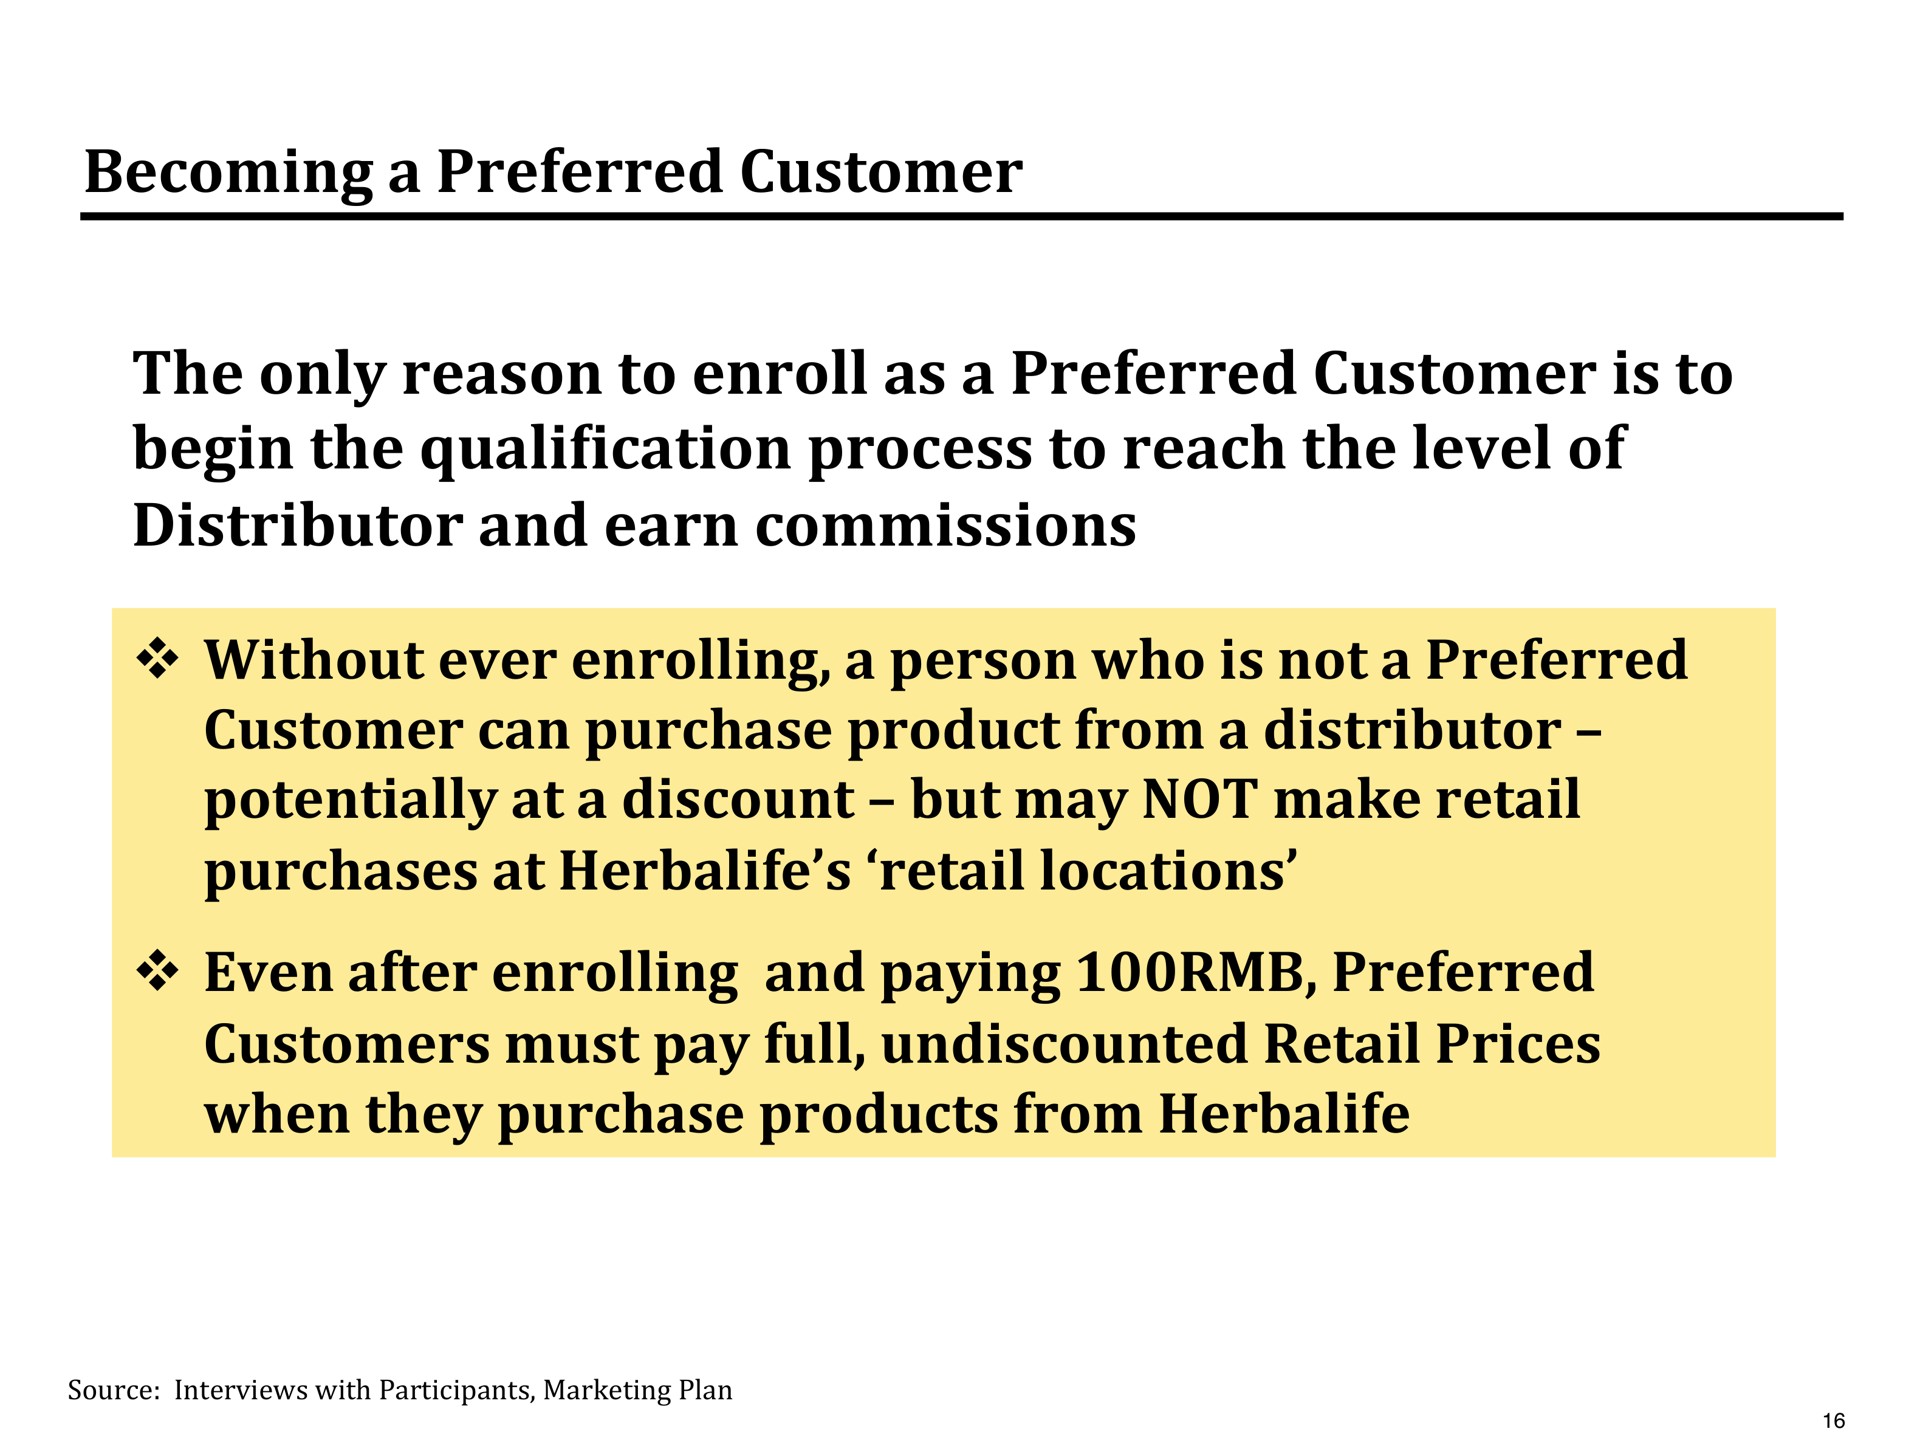 becoming a preferred customer the only reason to enroll as a preferred customer is to begin the qualification process to reach the level of distributor and earn commissions without ever enrolling a person who is not a preferred customer can purchase product from a distributor potentially at a discount but may not make retail purchases at retail locations even after enrolling and paying preferred customers must pay full undiscounted retail prices when they purchase products from | Pershing Square